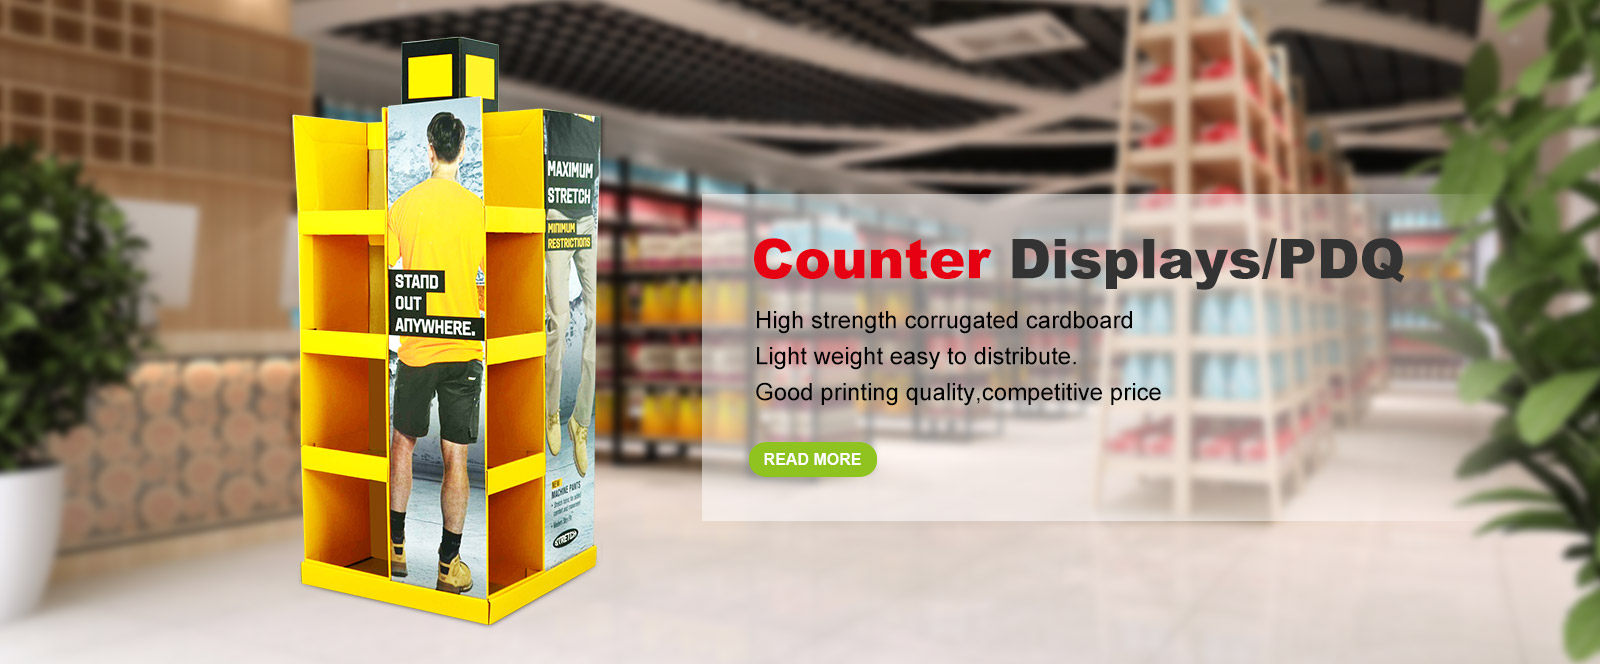 Counter displays/PDQ